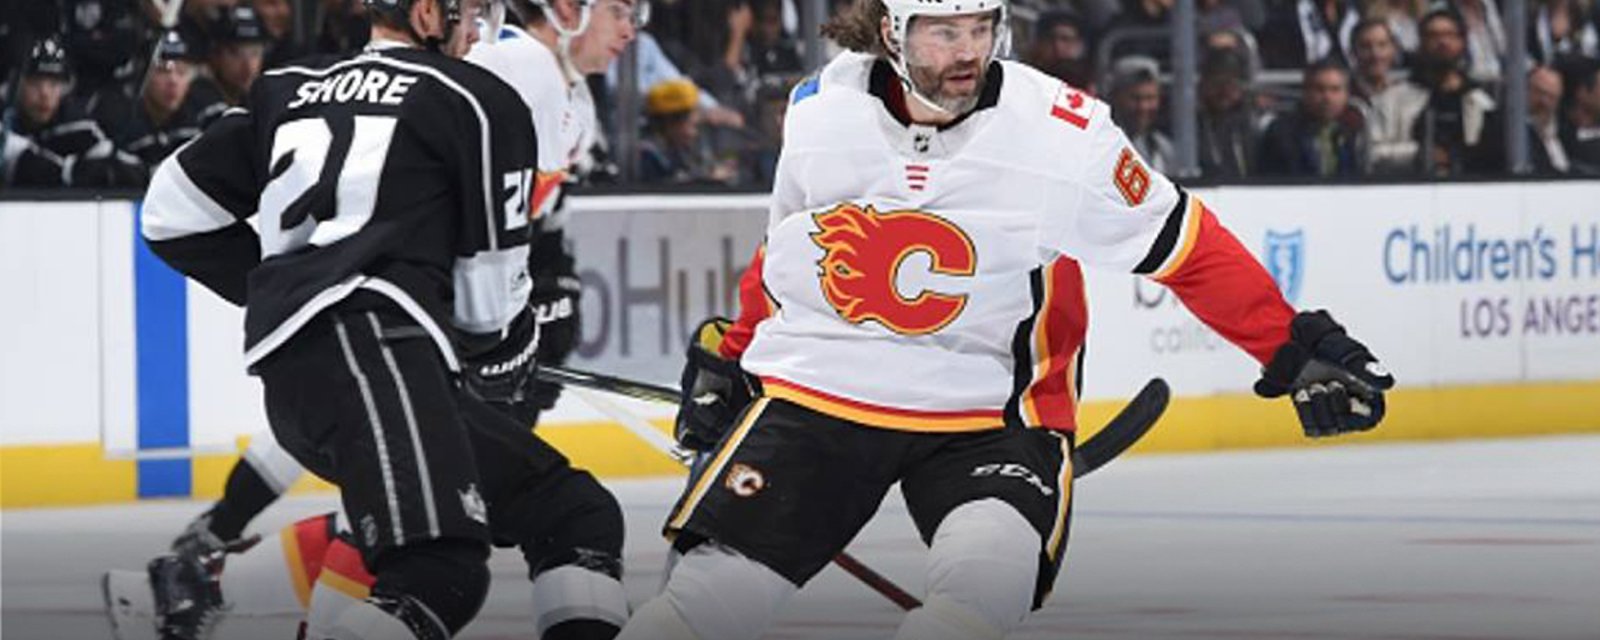 Injury Report: The worst possible news for Jagr and the Flames